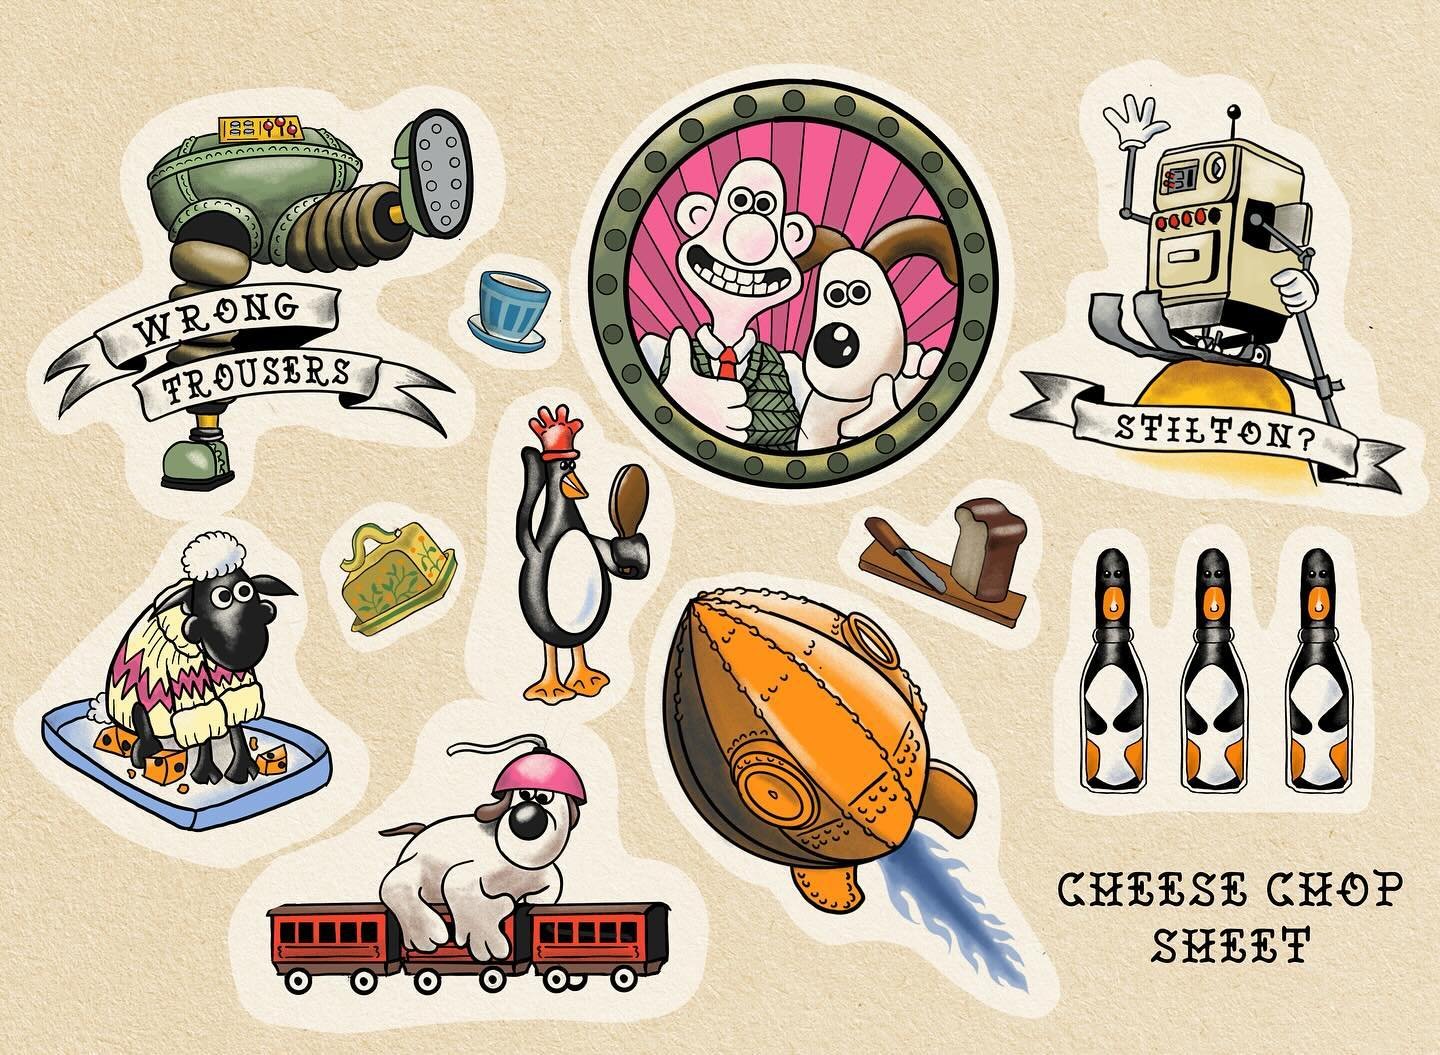 The sheet no one asked for but feeds my childhood soul. Booking through link in bio. #wallaceandgromit #cheesegromit